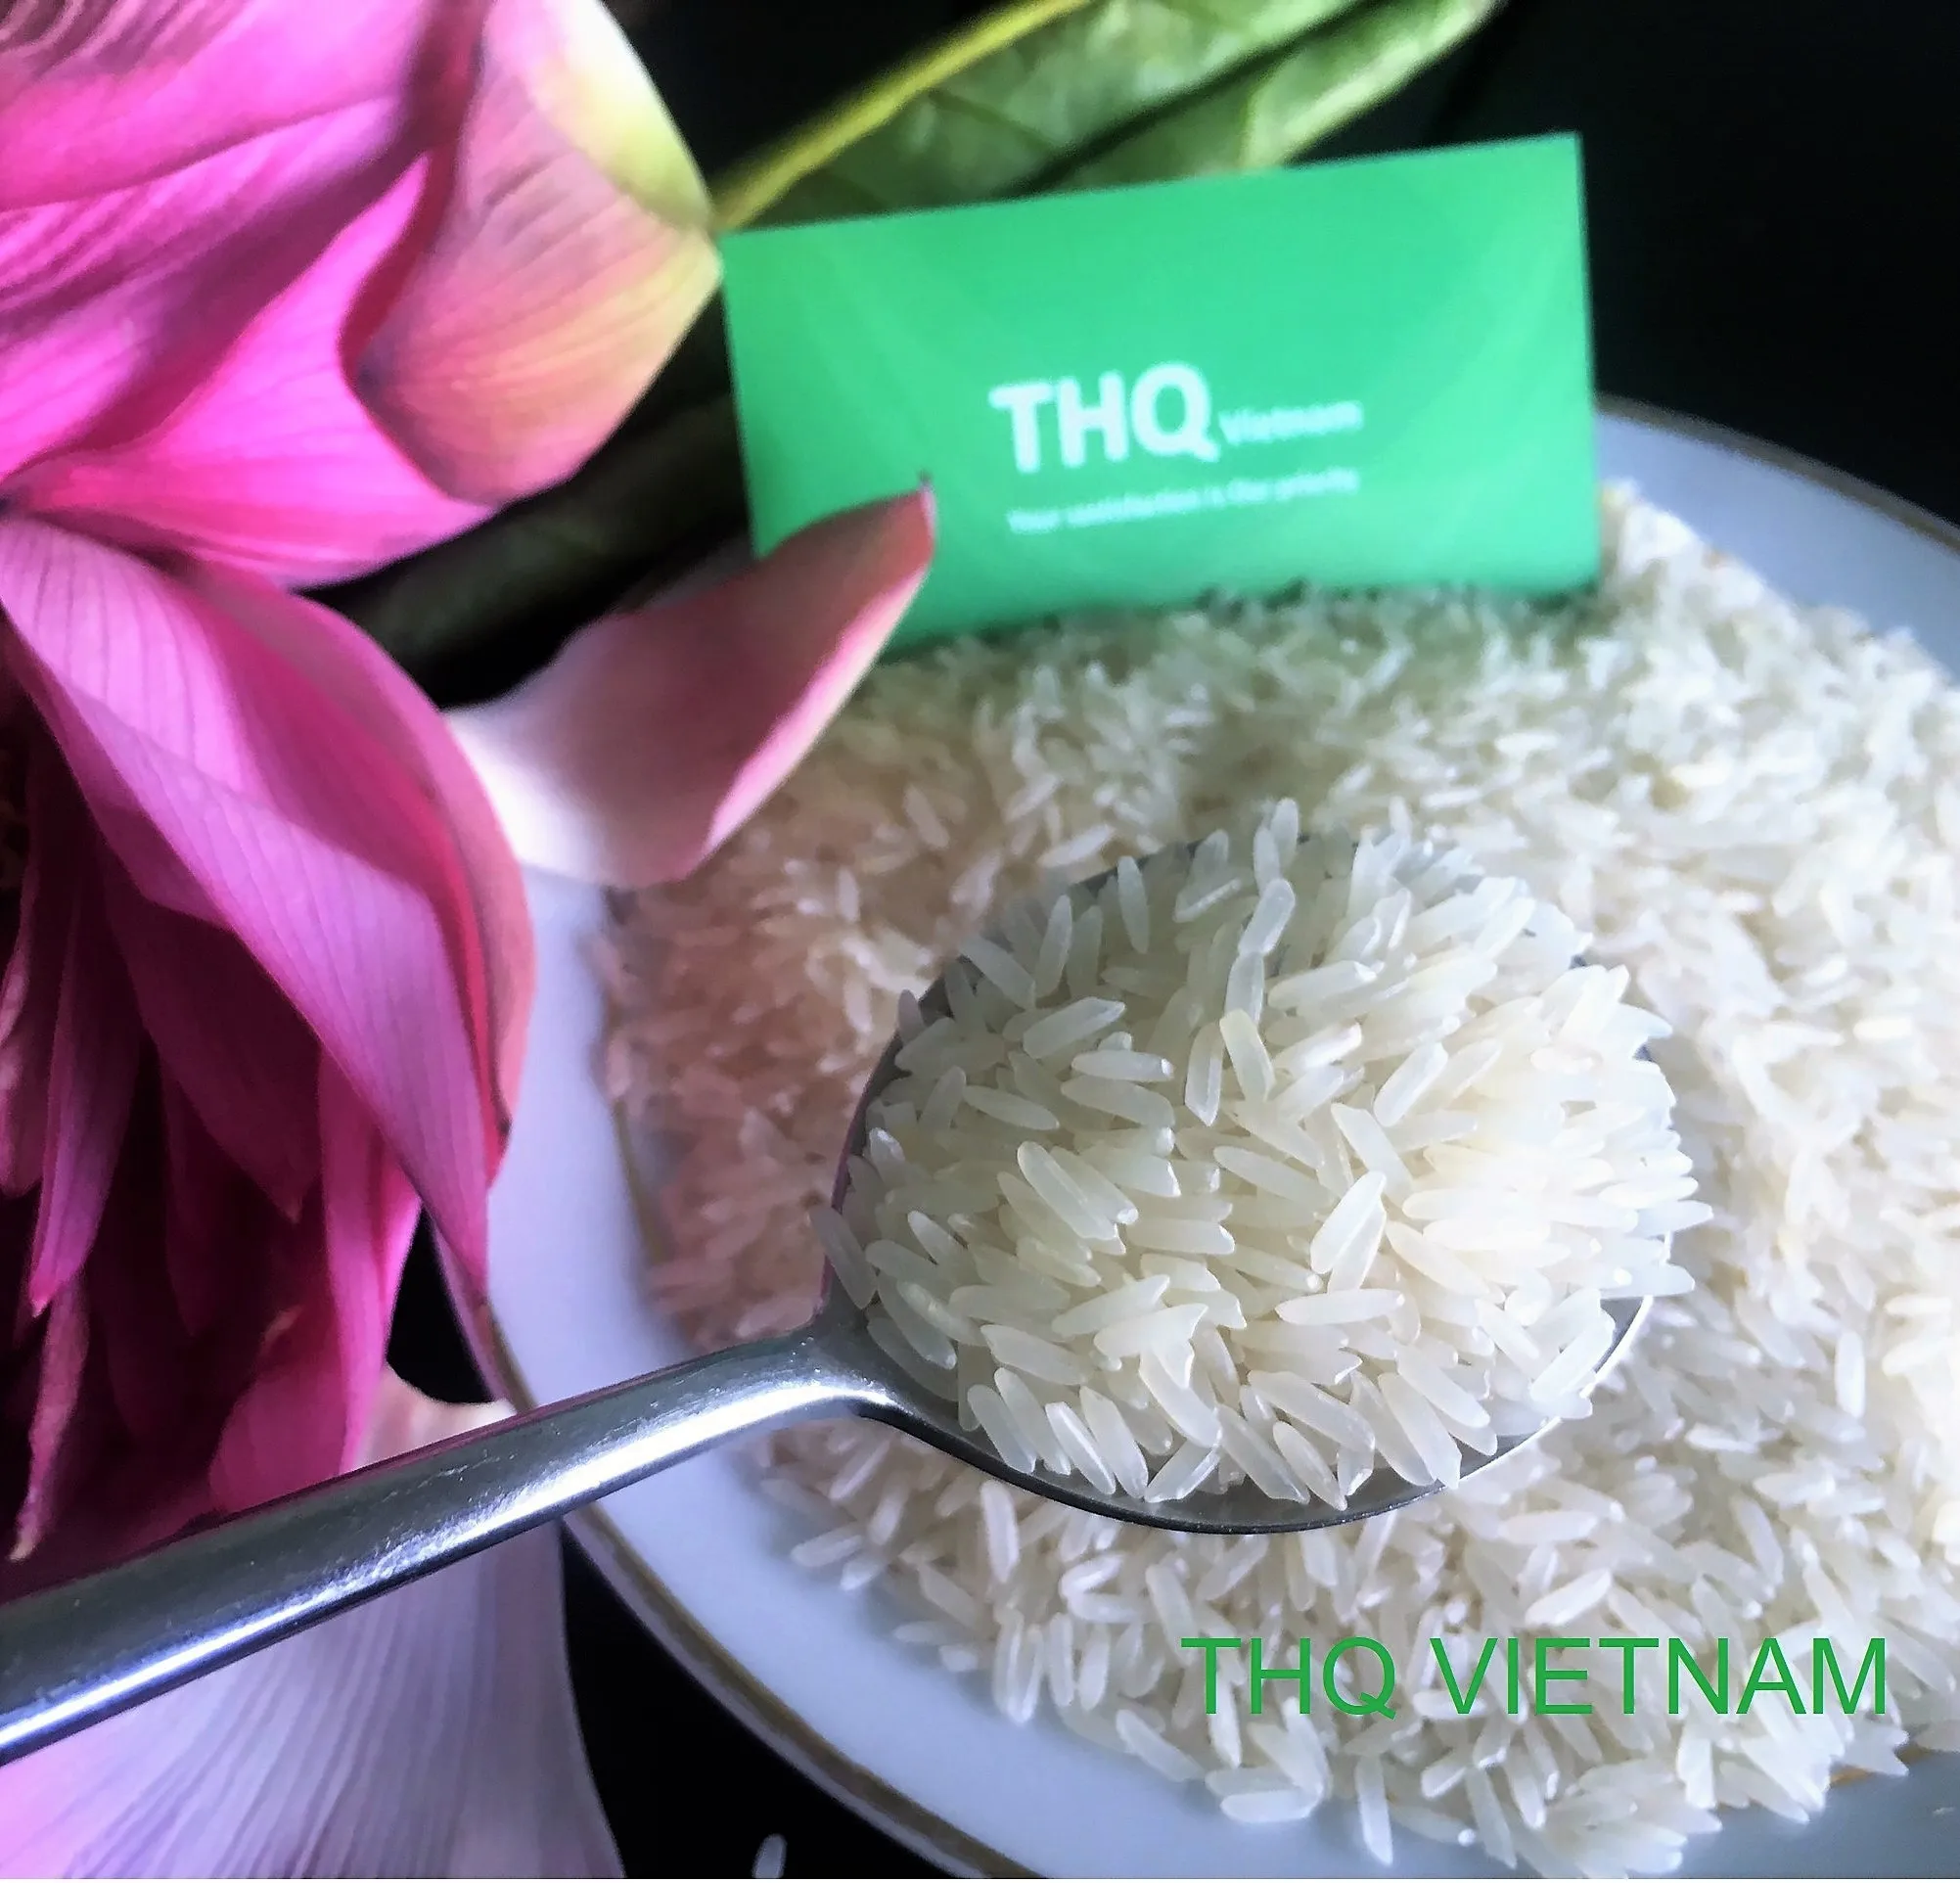 
[THQ VIETNAM] THE BEST JASMINE RICE   LONG GRAIN WHITE RICE/ ST24 WITH CHEAP PRICE (Ms. Rose:  84 977 610 525)  (62011081358)